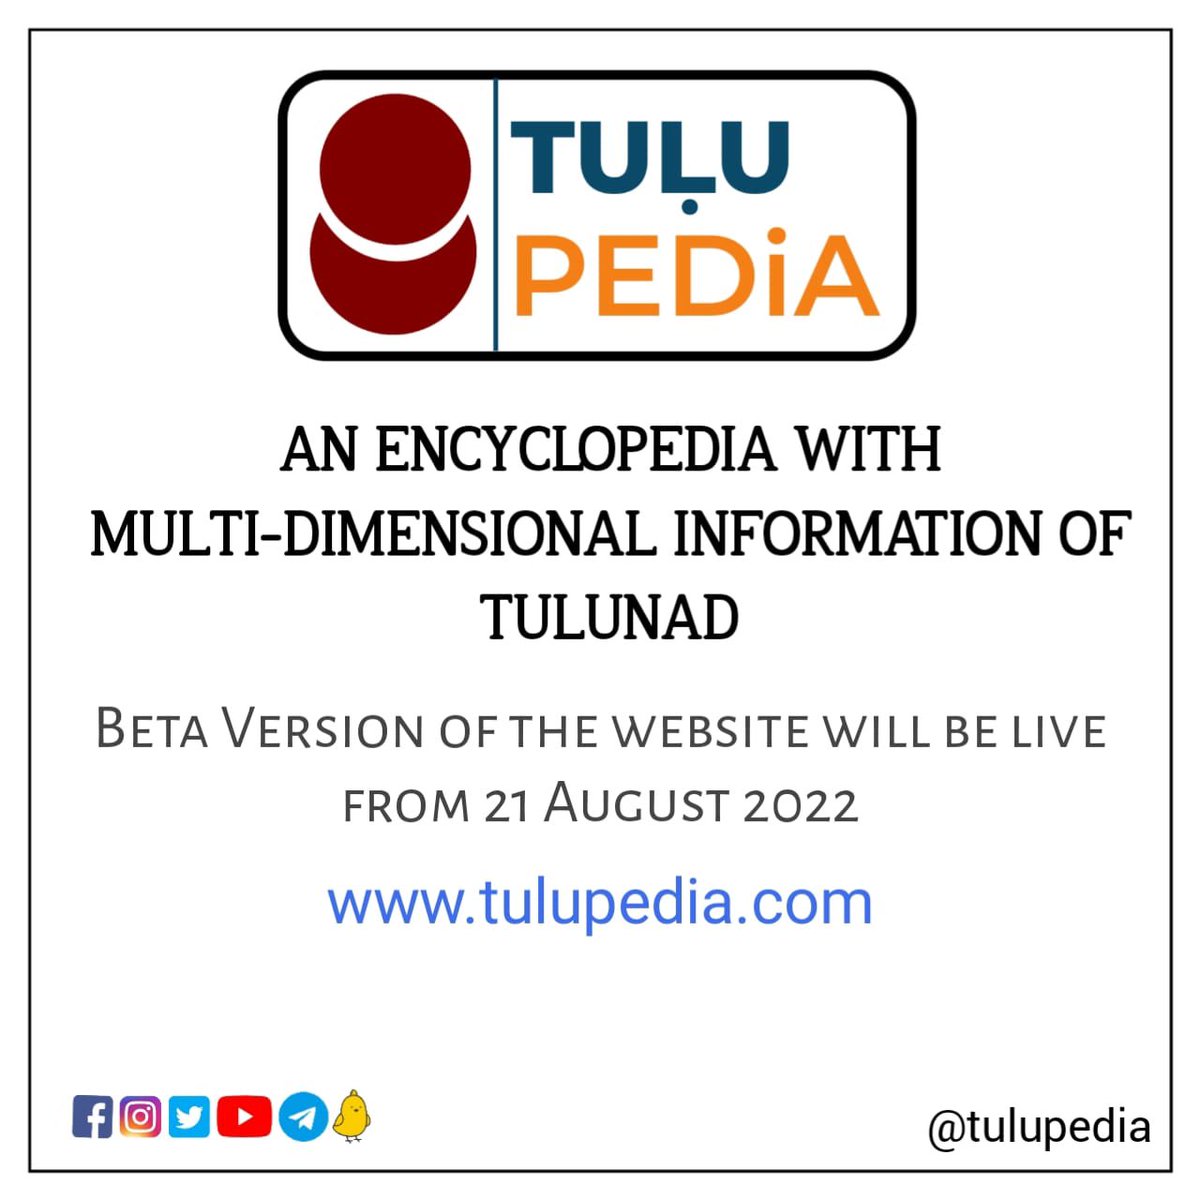 We are ready to take you to the land, which has it all! ❤️ Presenting Tulupedia tomorrow. One can always rely on our website for unbiased, authentic, unaltered info about Tulu and Tulunad. This will be one source for all your inquisitiveness. Lets walk together to @tulupedia 🐯